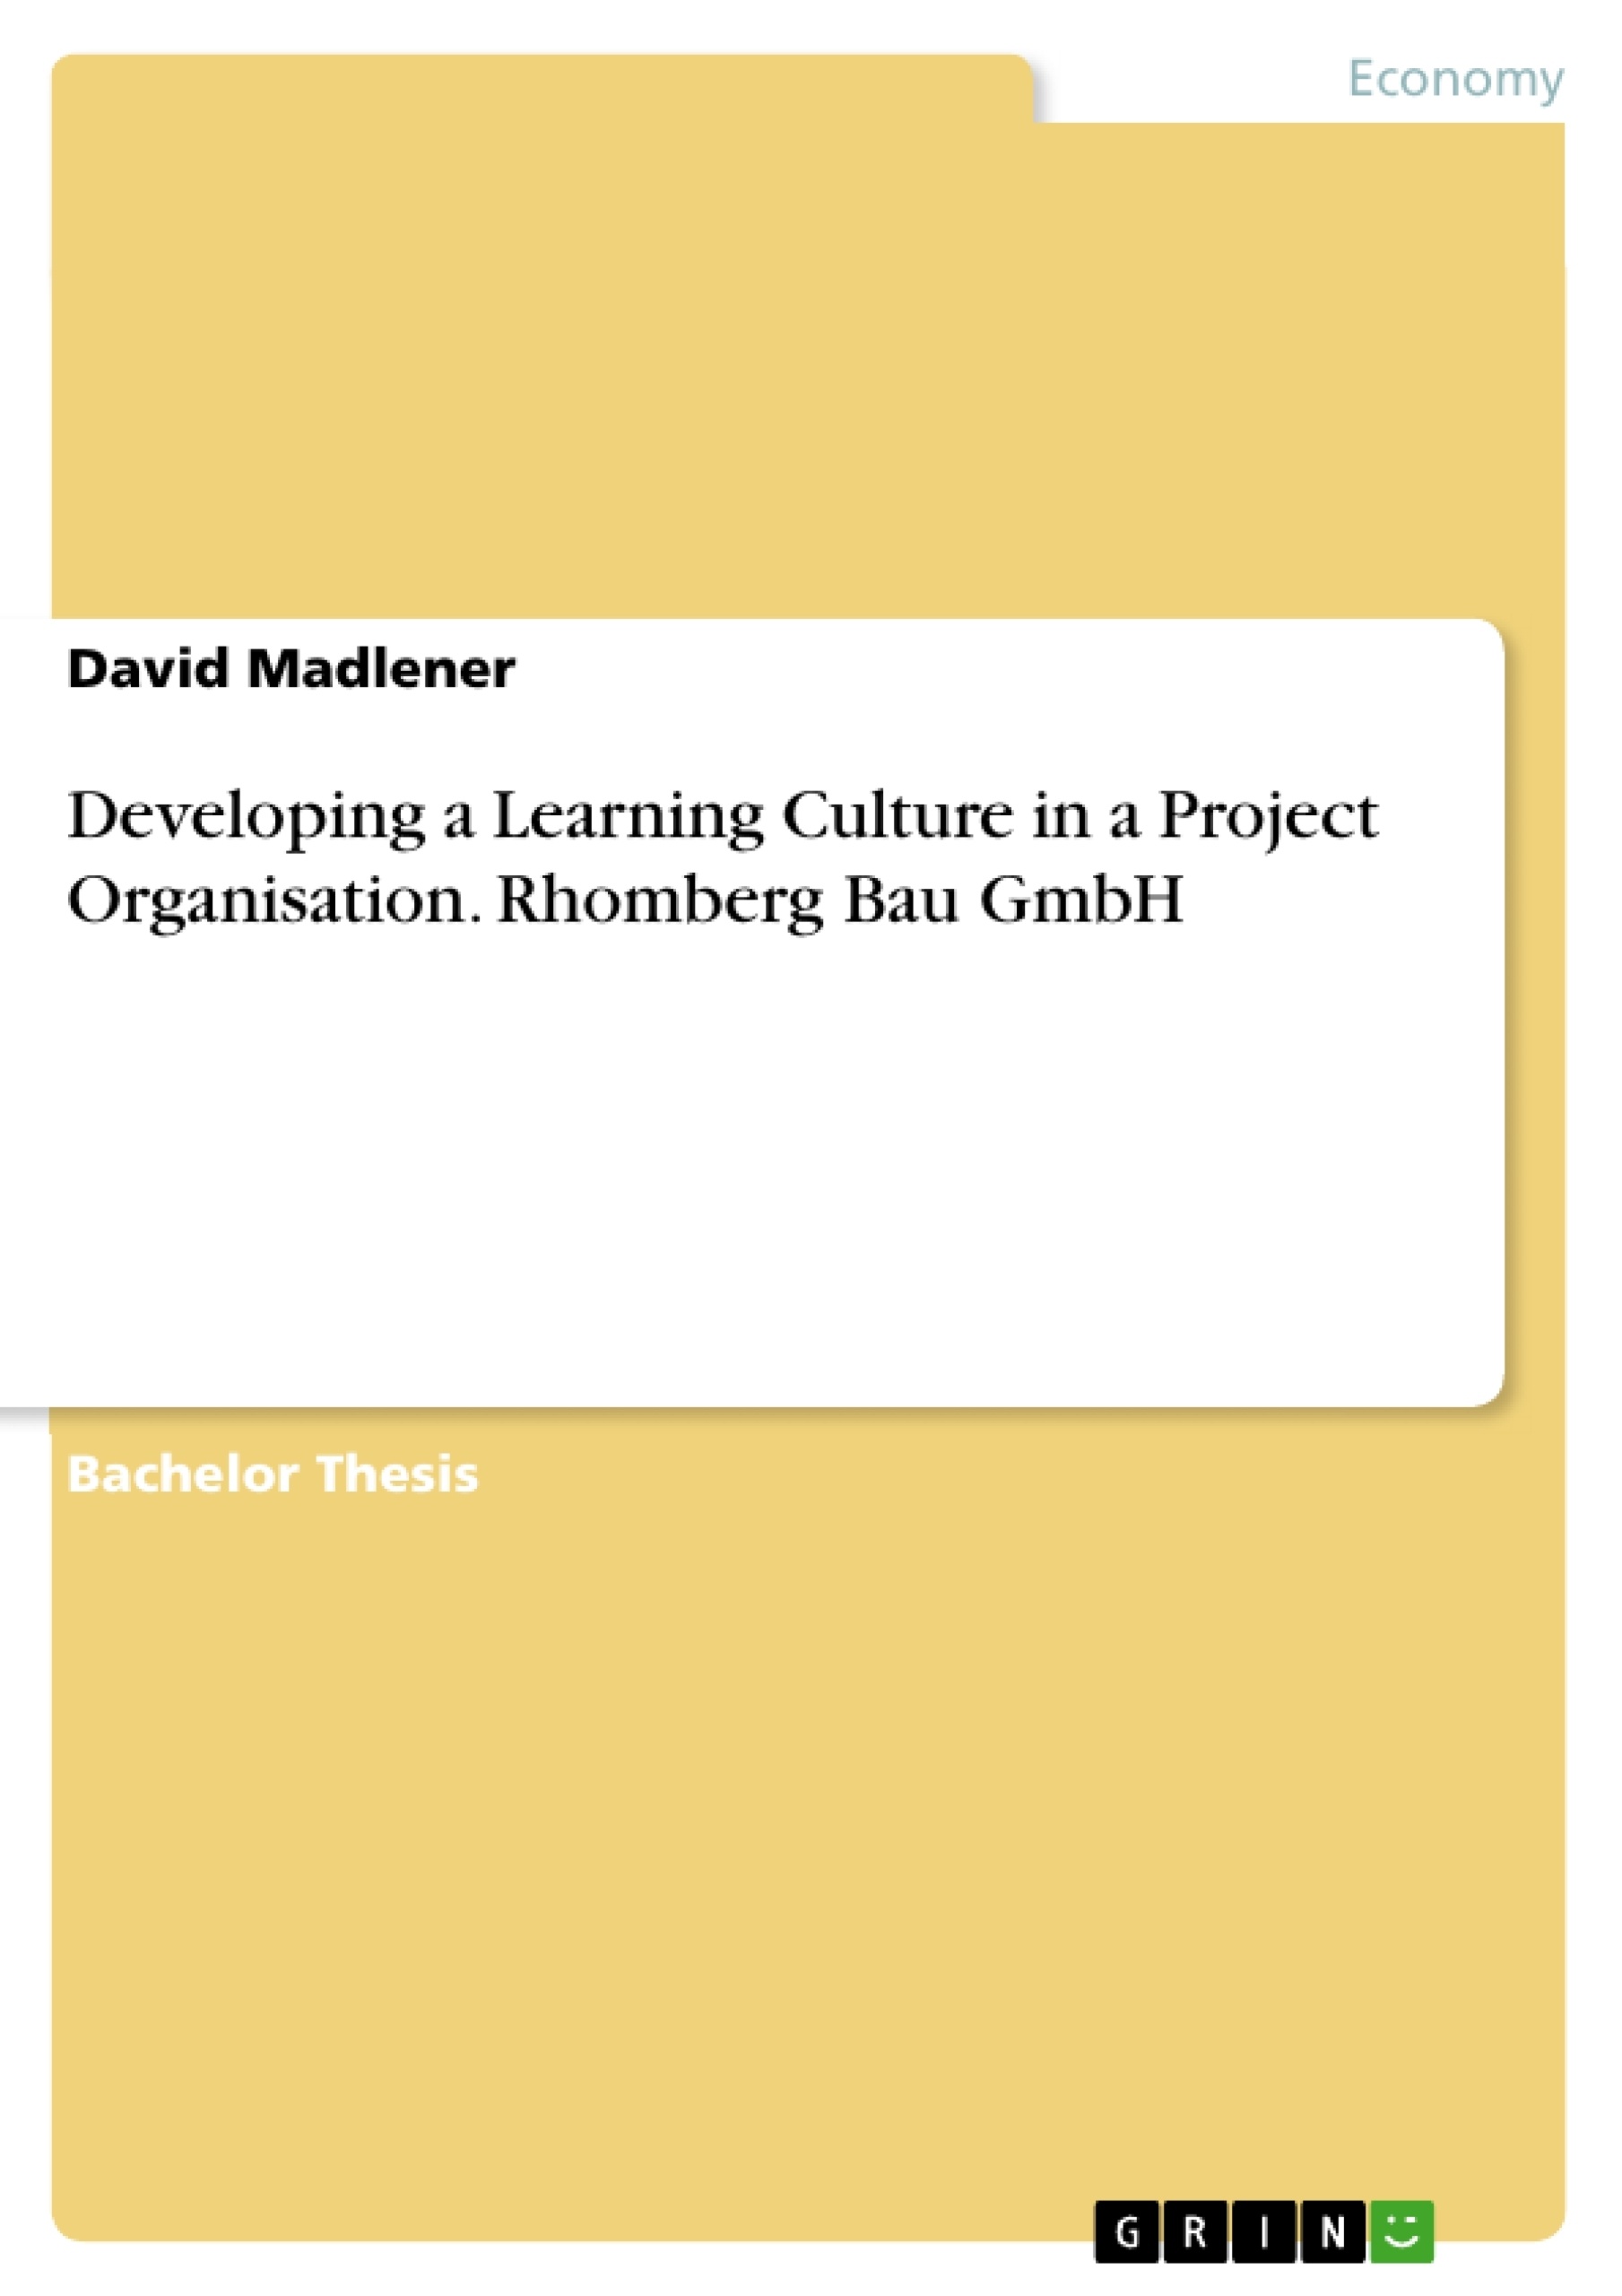 Título: Developing a Learning Culture in a Project Organisation. Rhomberg Bau GmbH